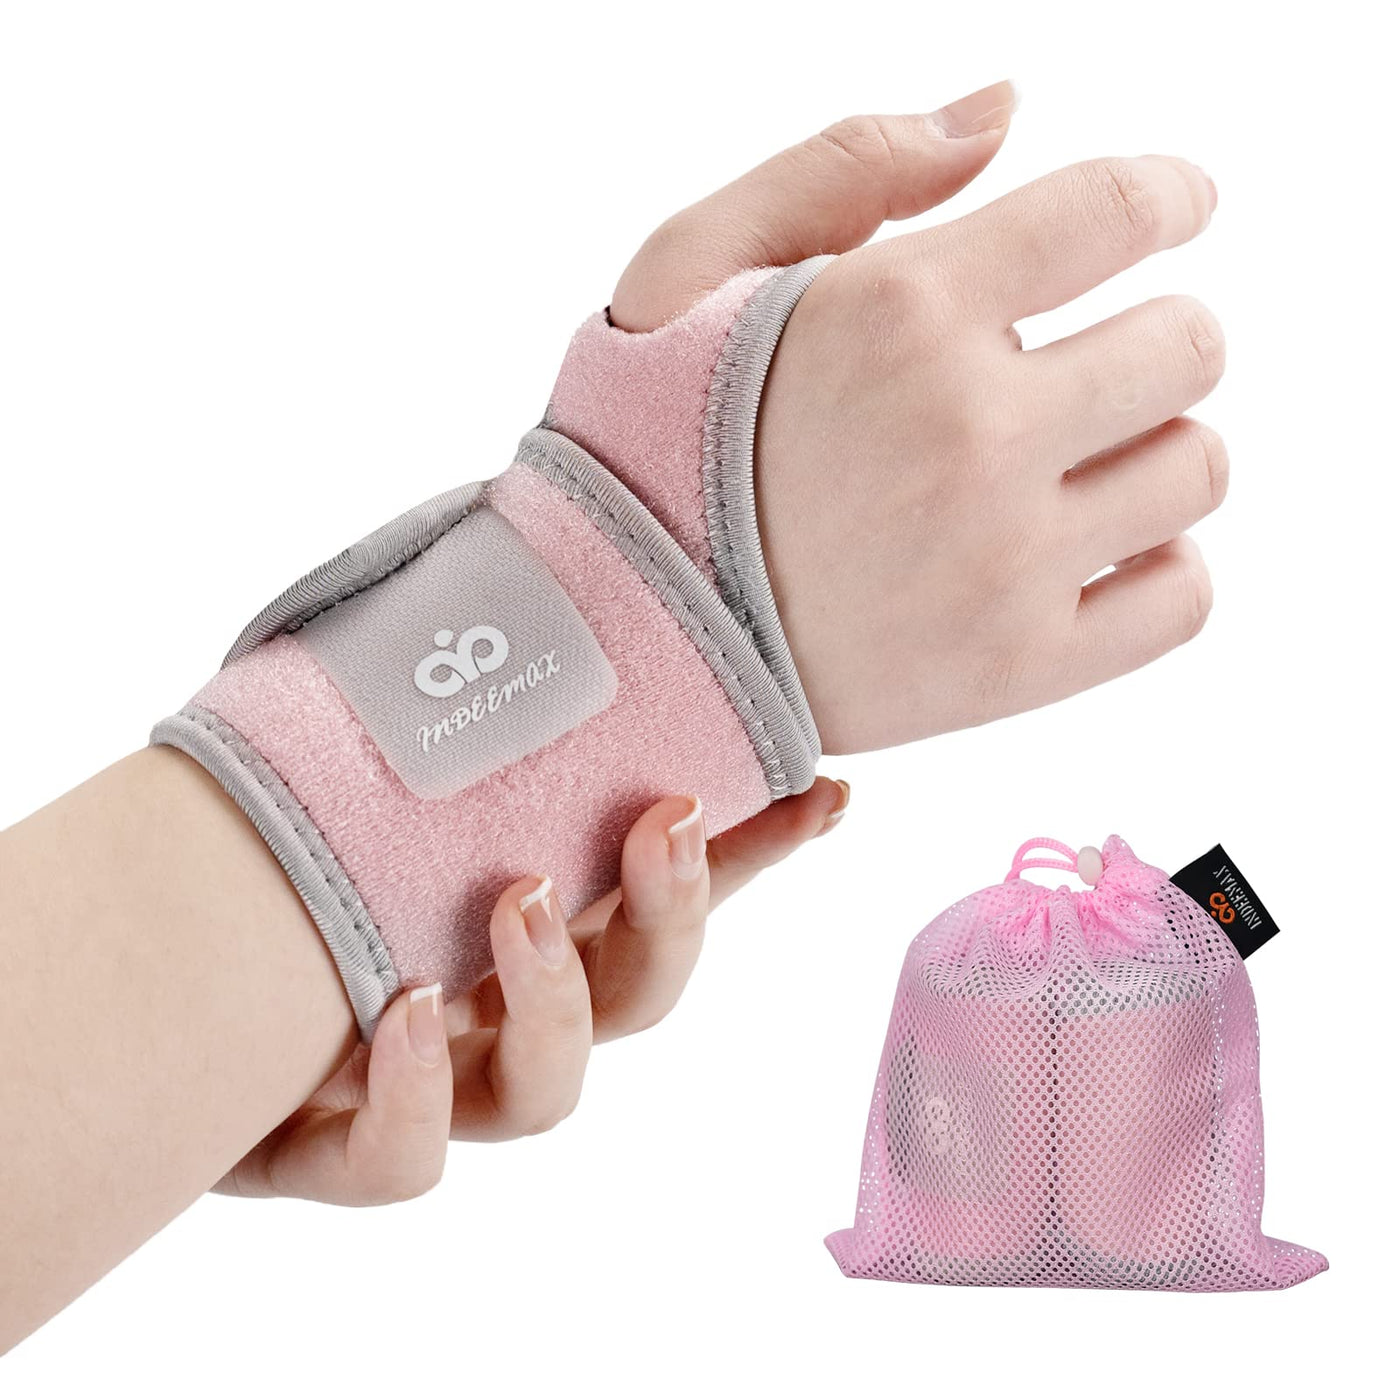 2 Pack Wrist Brace Adjustable Wrist Support Wrist Straps for Fitness  Weightlifting, Tendonitis, Carpal Tunnel Arthritis, Wrist Wraps Wrist Pain  Relief